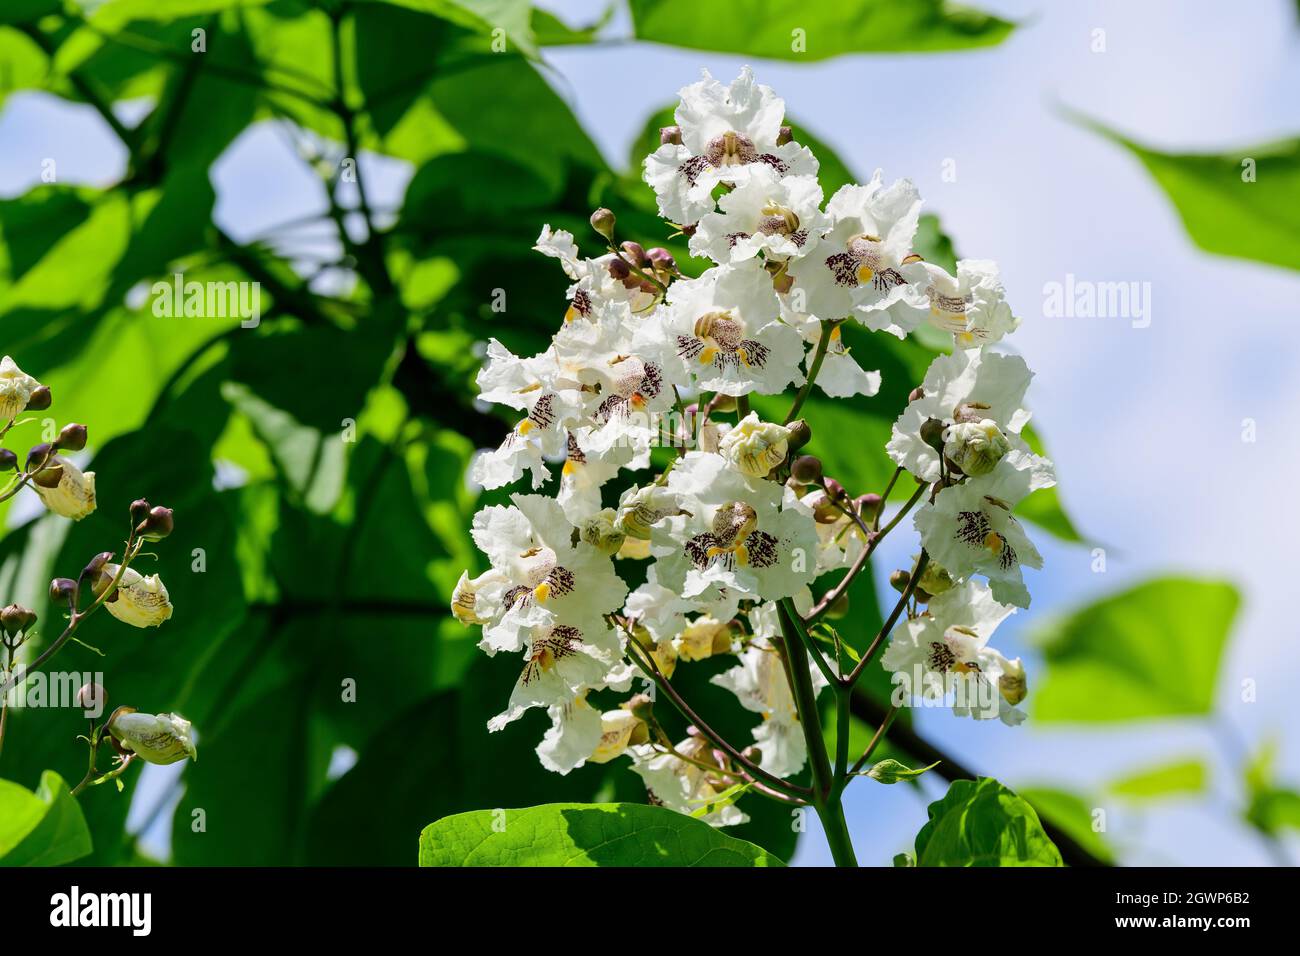 White Flowers Of Catalpa Bignonioides Plant Known As Southern Catalpa, Cigartree Or Indian Bean Tree Stock Photo